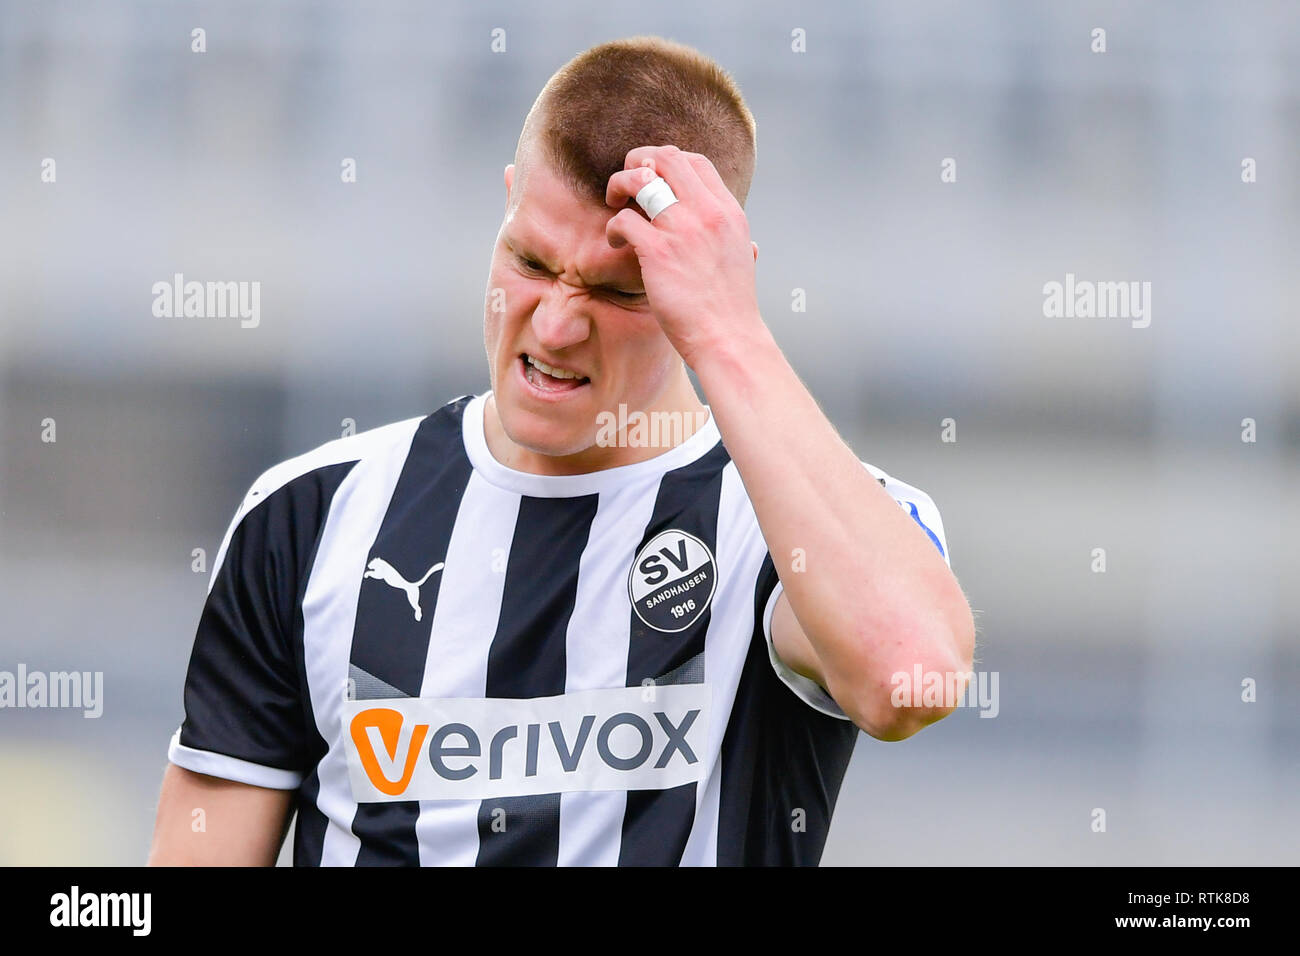 Sandhausen, Germany. 02nd Mar, 2019. Soccer: 2nd Bundesliga, SV Sandhausen - Erzgebirge Aue, 24th matchday, in Hardtwaldstadion. Sandhausens Kevin Behrens gesticulated. Credit: Uwe Anspach/dpa - IMPORTANT NOTE: In accordance with the requirements of the DFL Deutsche Fußball Liga or the DFB Deutscher Fußball-Bund, it is prohibited to use or have used photographs taken in the stadium and/or the match in the form of sequence images and/or video-like photo sequences./dpa/Alamy Live News Stock Photo